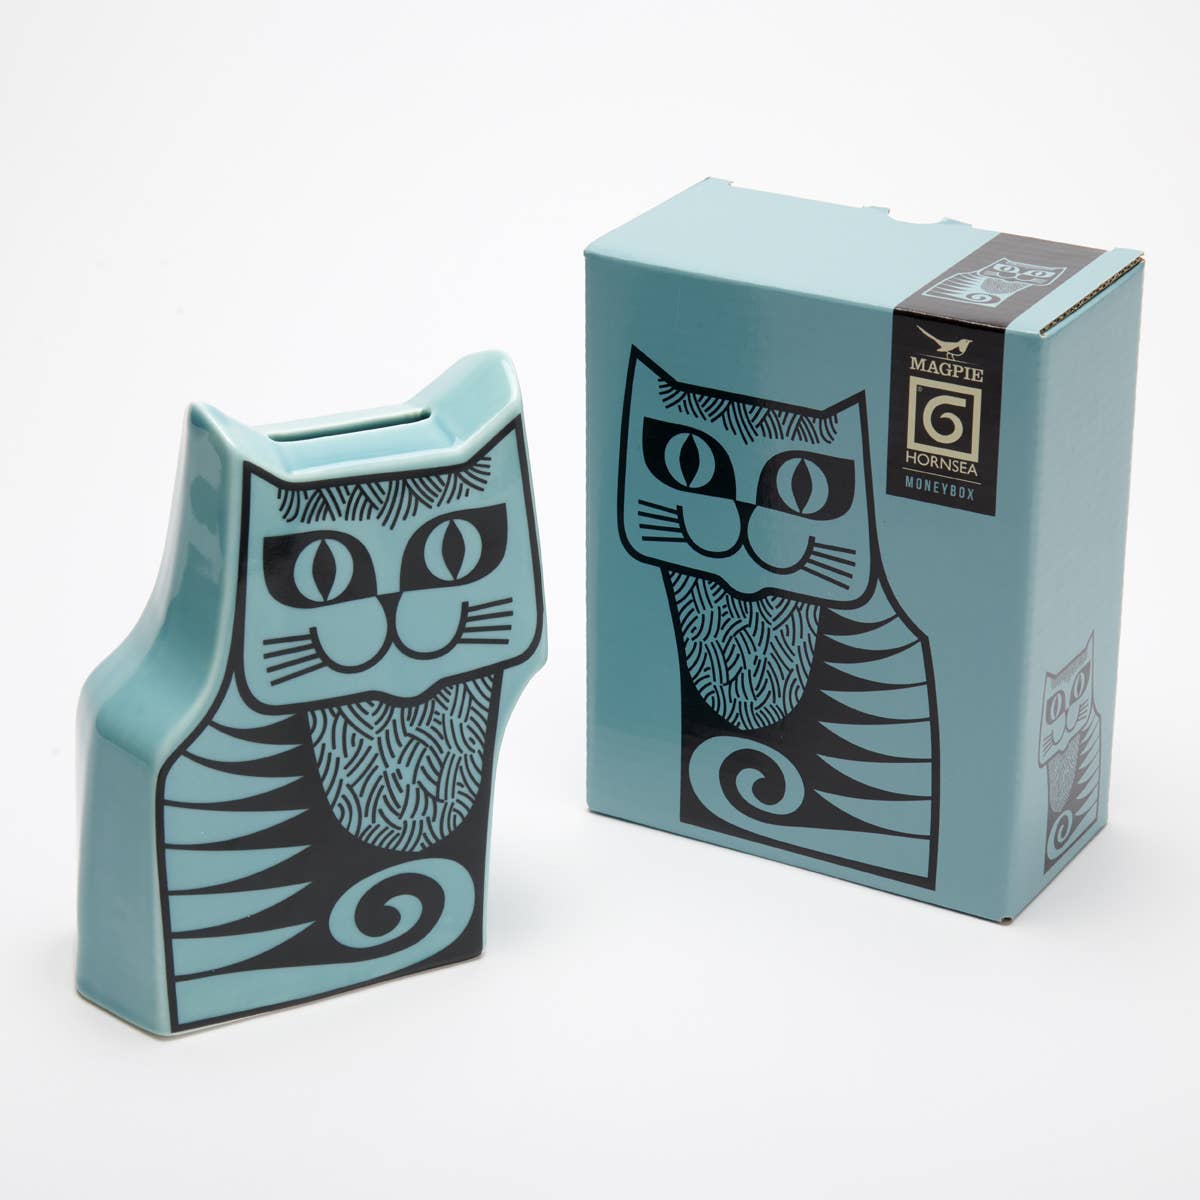 Cat Moneybox in Teal by Magpie x Hornsea